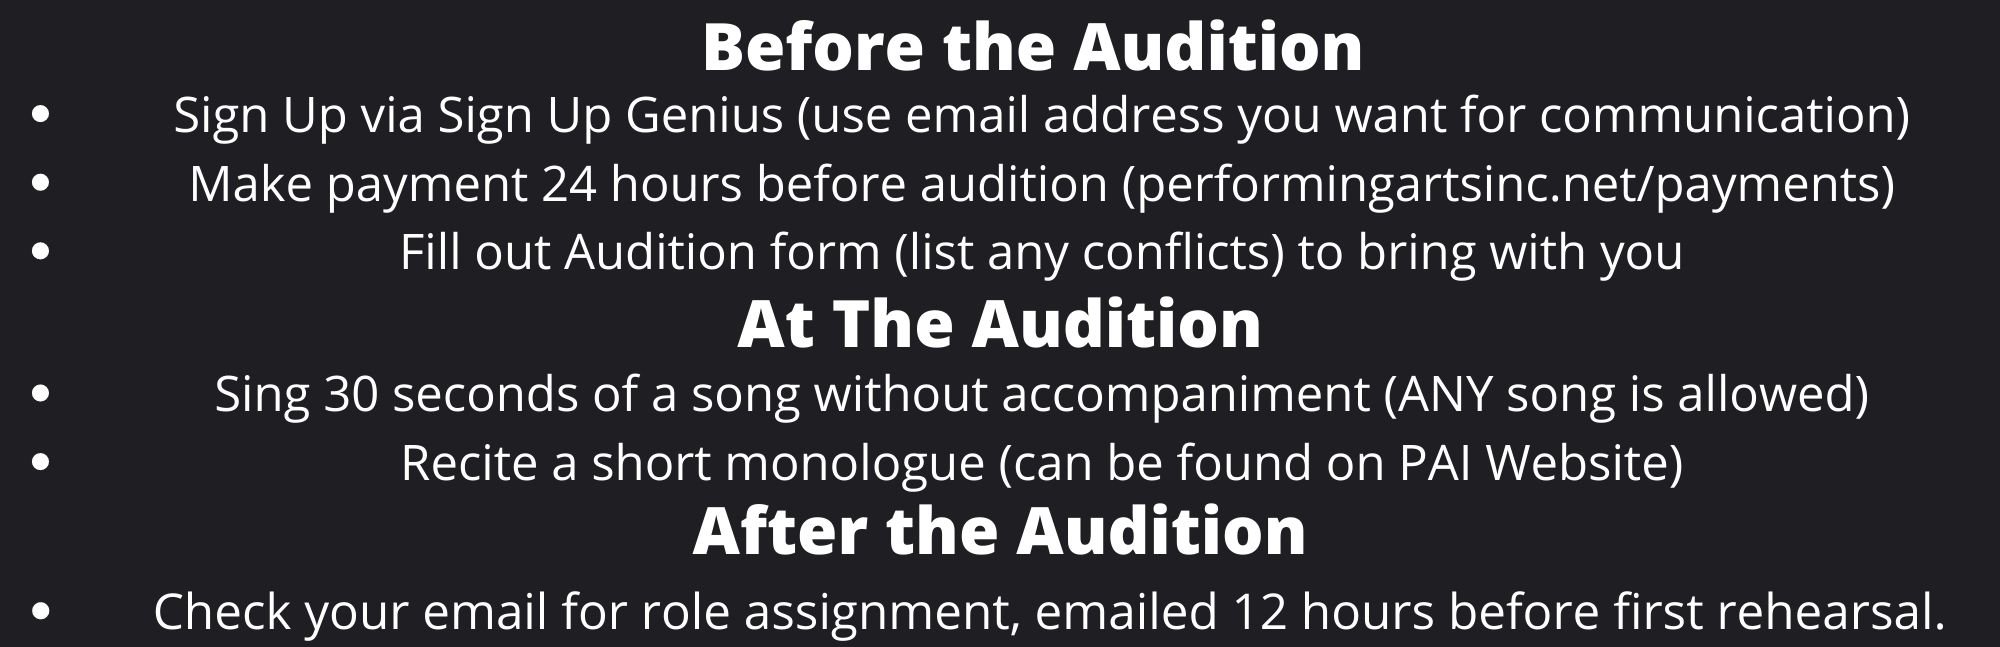 Audition_How_To[1].jpg